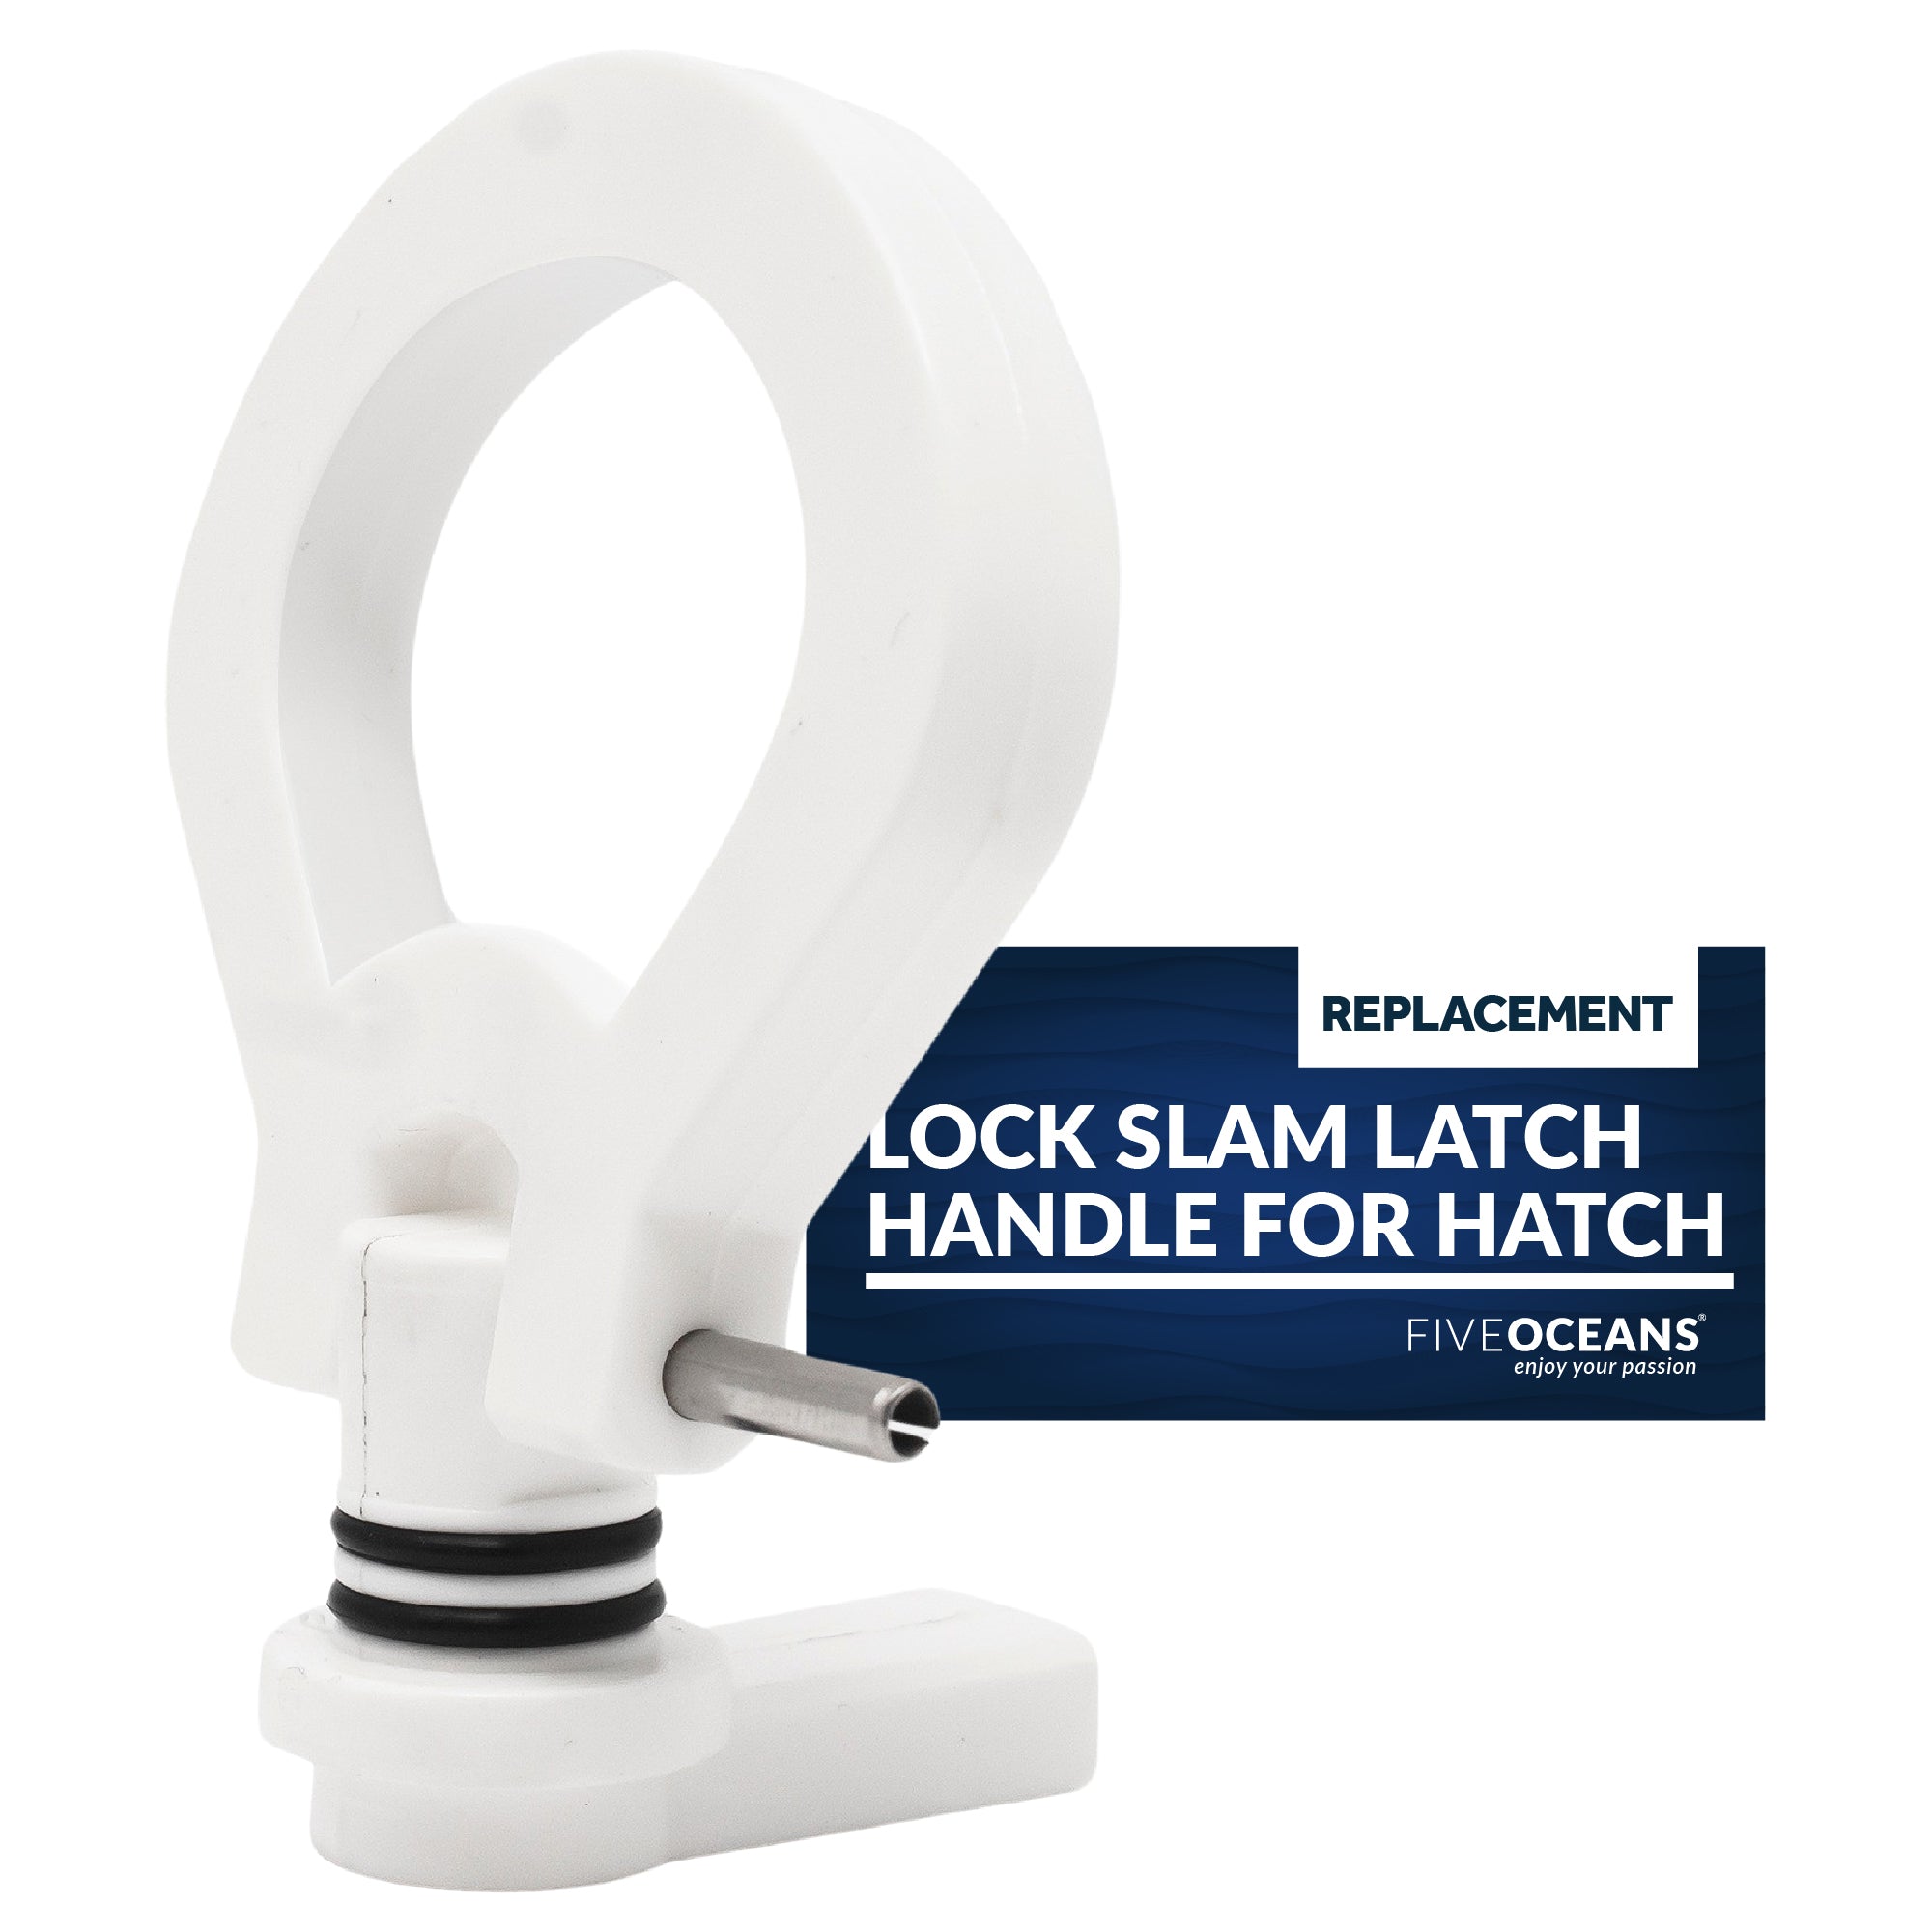 Replacement Lock Slam Latch Handle for Hatch - FO4284